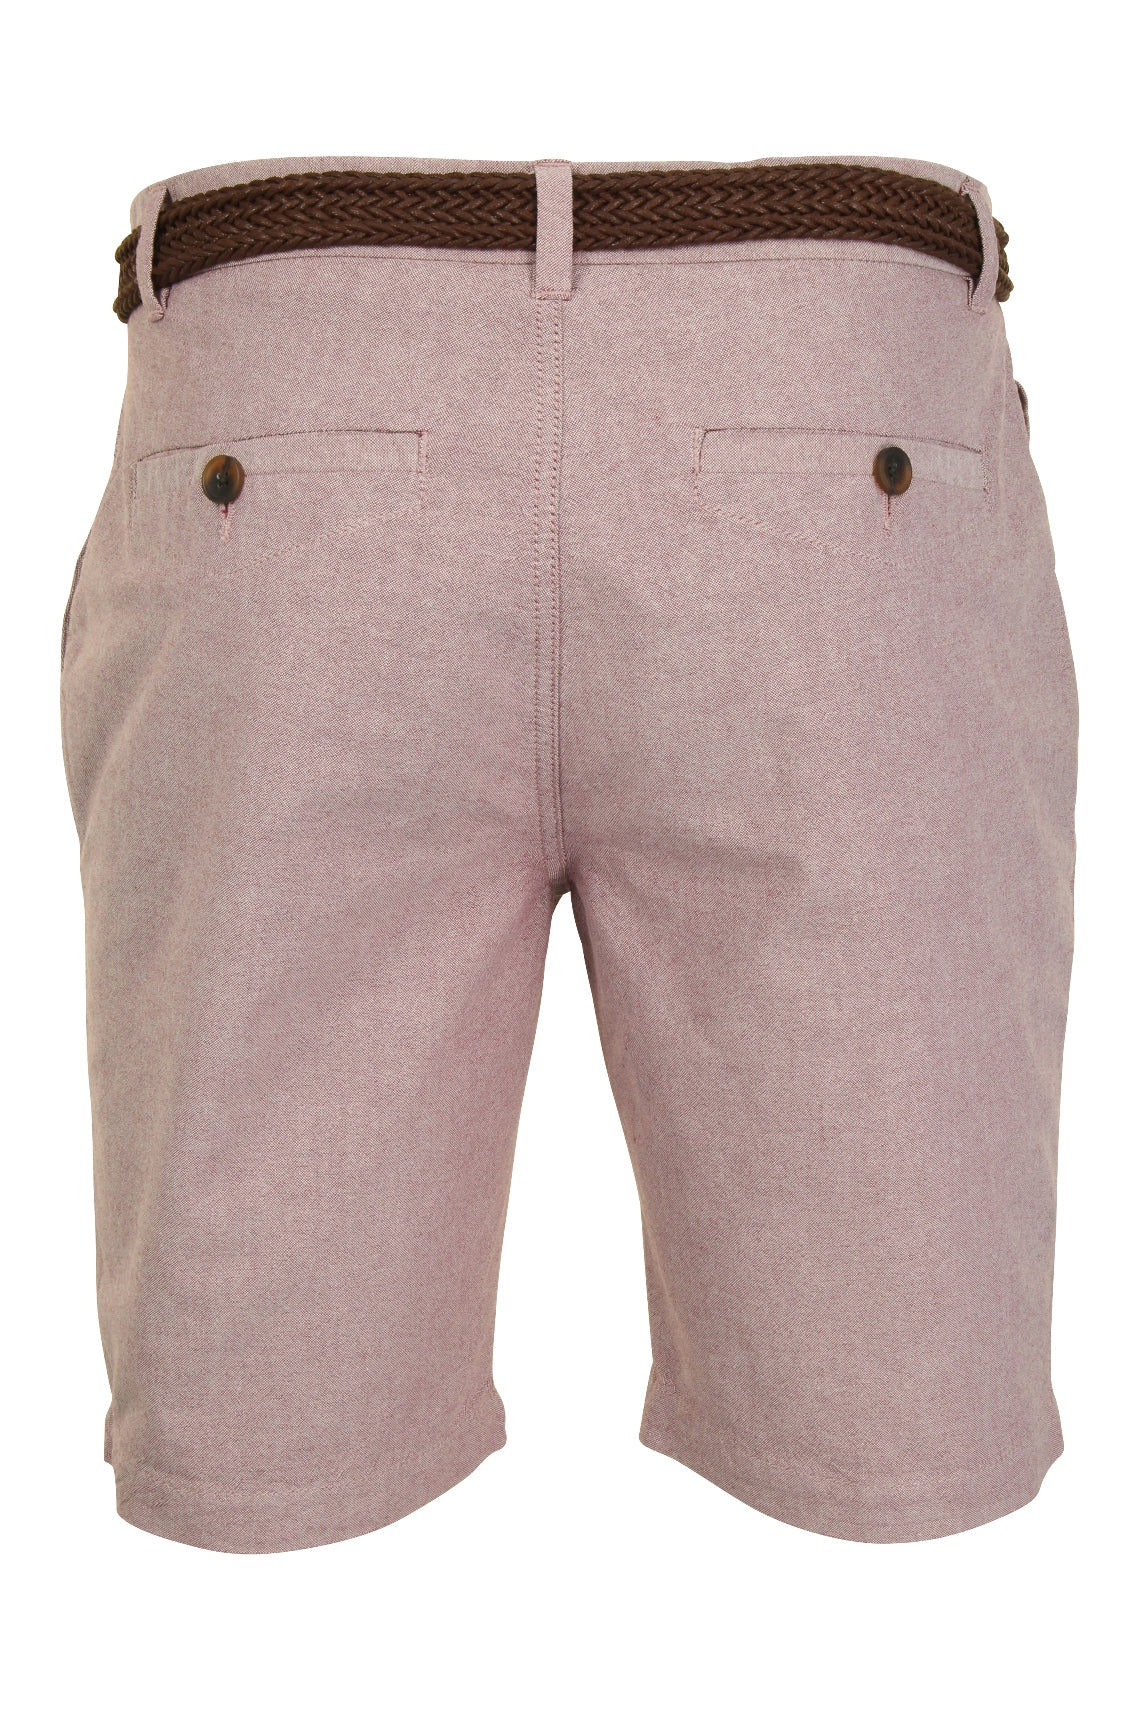 Xact Mens Oxford Chino Shorts with Belt, 03, Xsrt1029, Oxford Pink (Brown Belt)